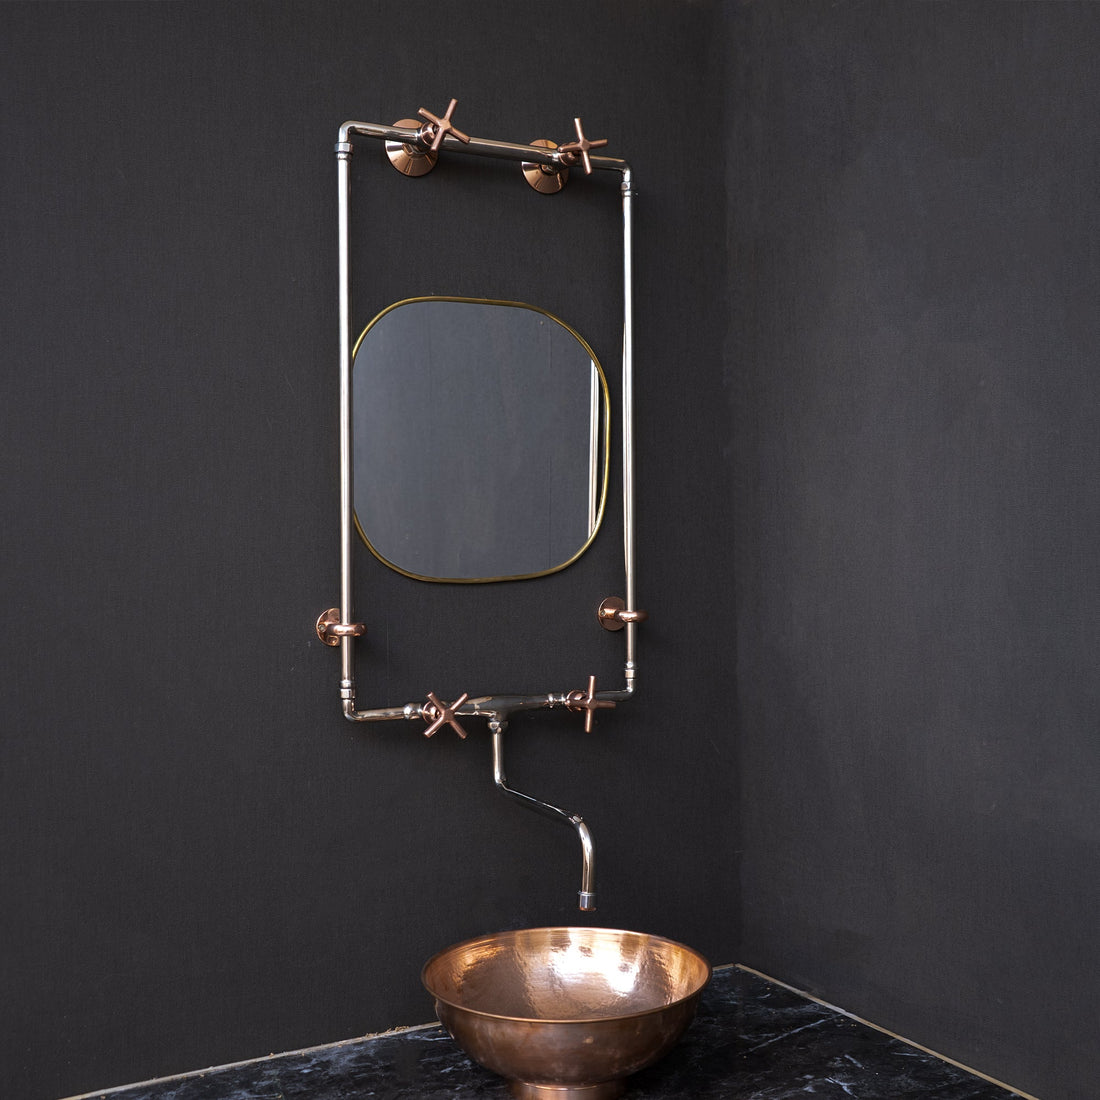 Handcrafted Wall Mounted Sink Faucet with Exposed Supply - Brassna